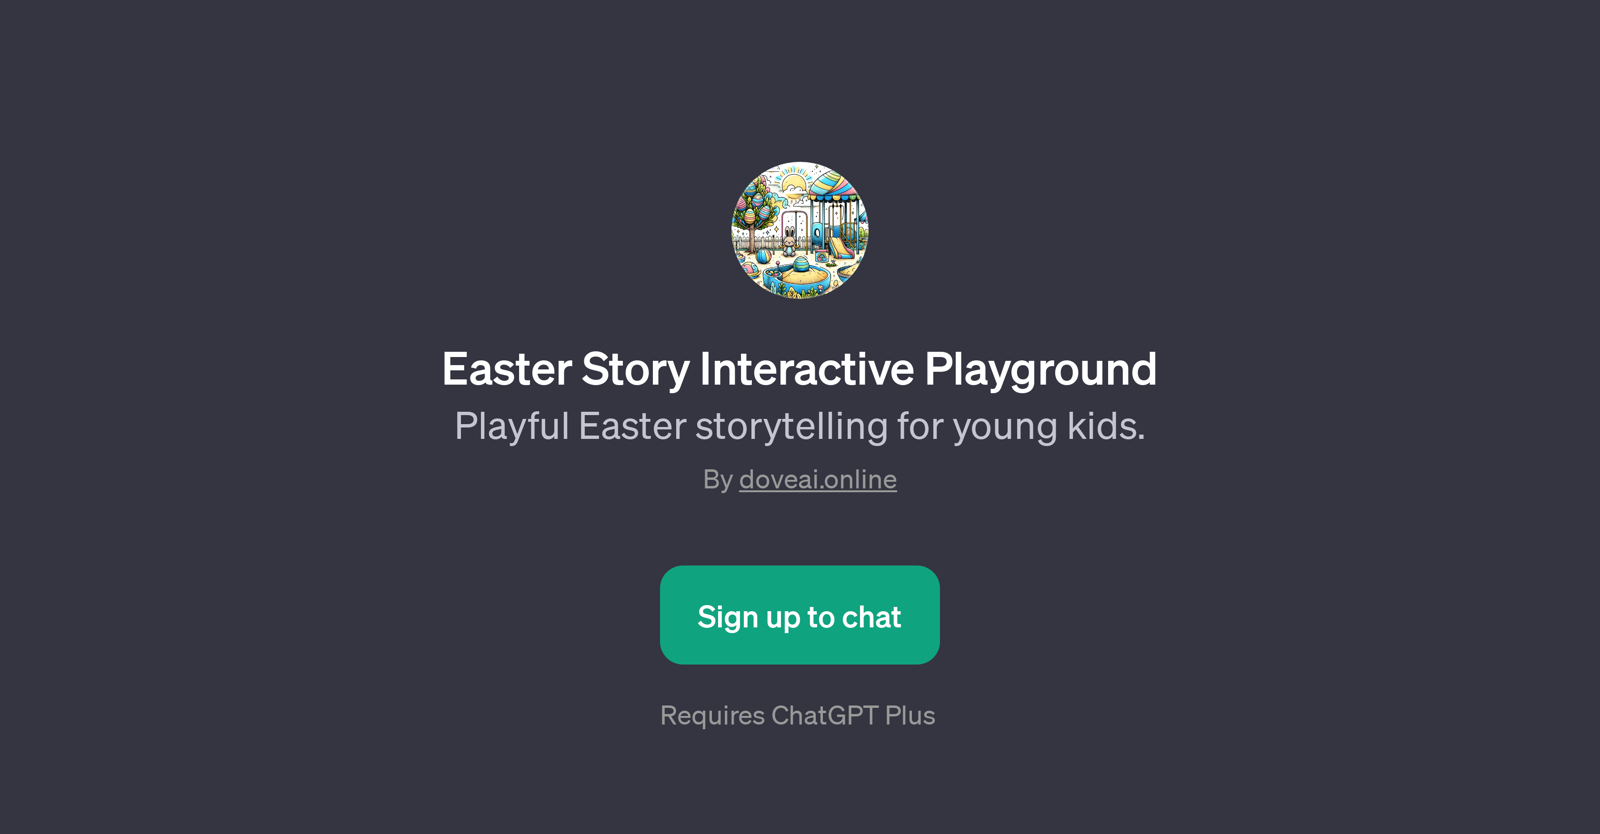 Easter Story Interactive Playground website